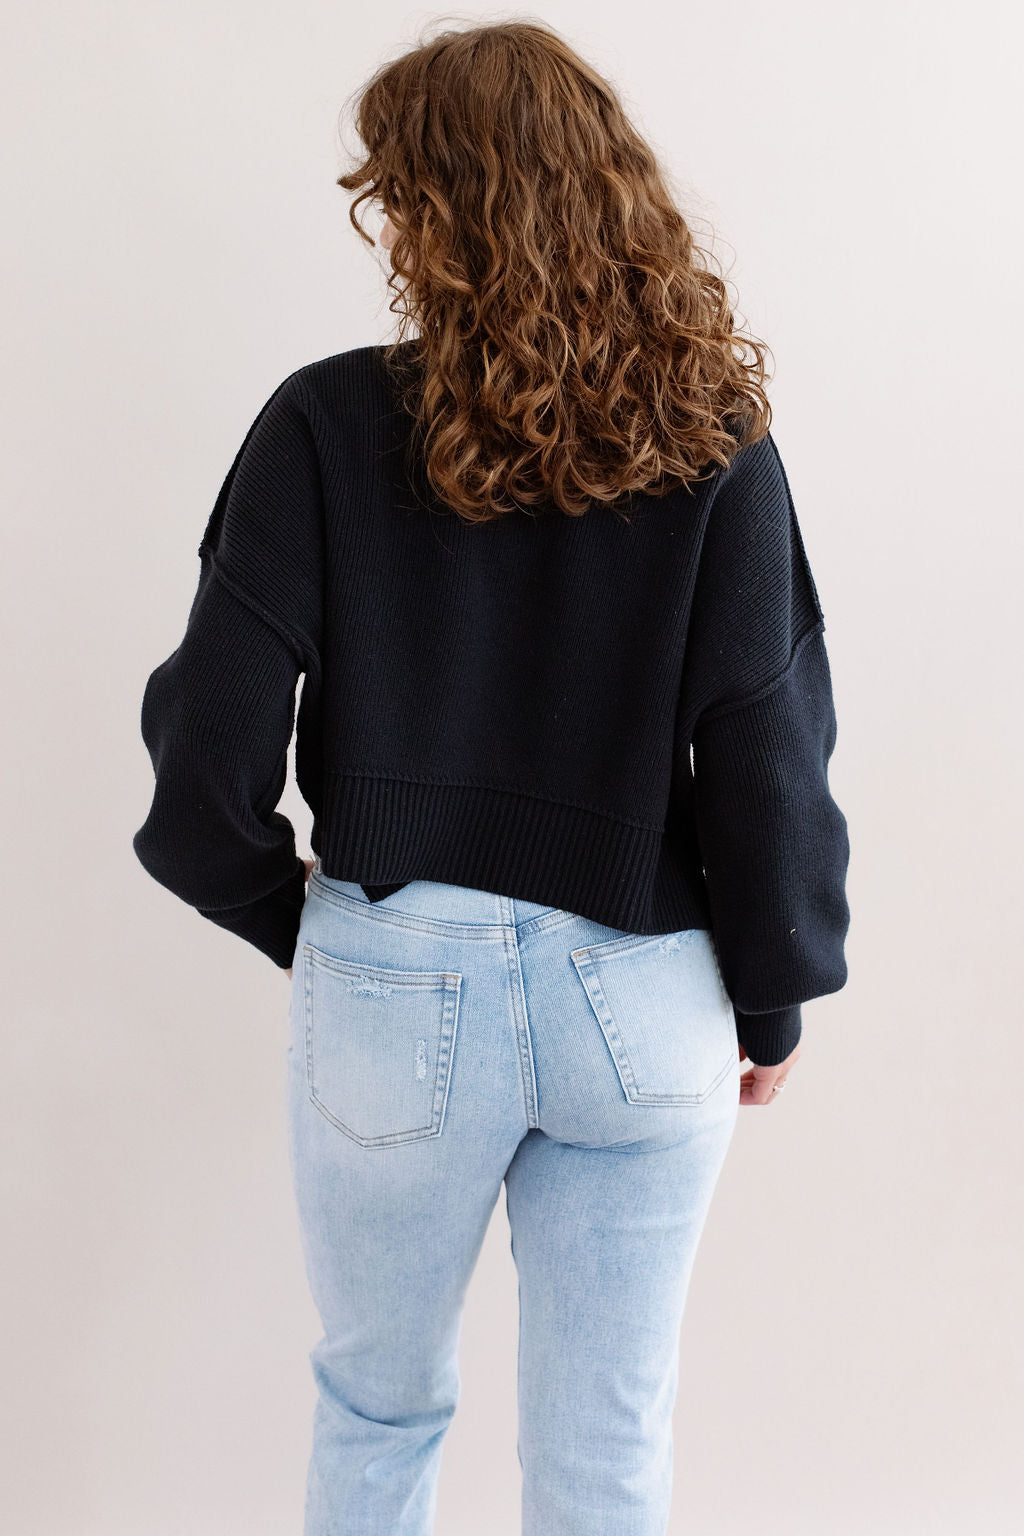 Free People | Easy Street Crop Pullover | Black - Poppy and Stella